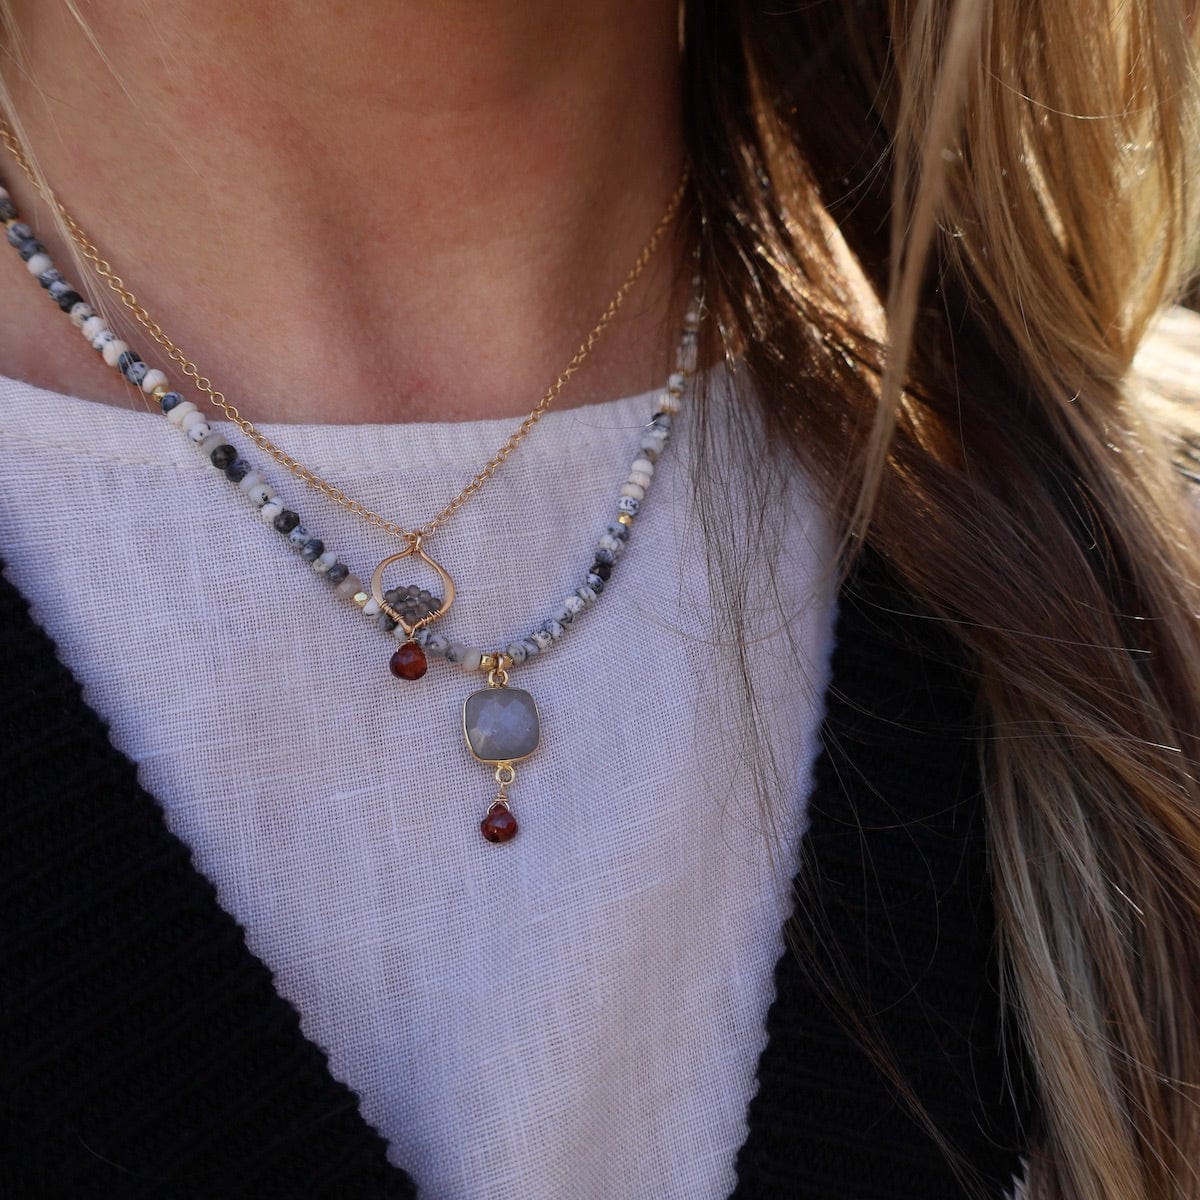 NKL-VRM Tiny Arabesque Necklace with Garnet, gray moonston